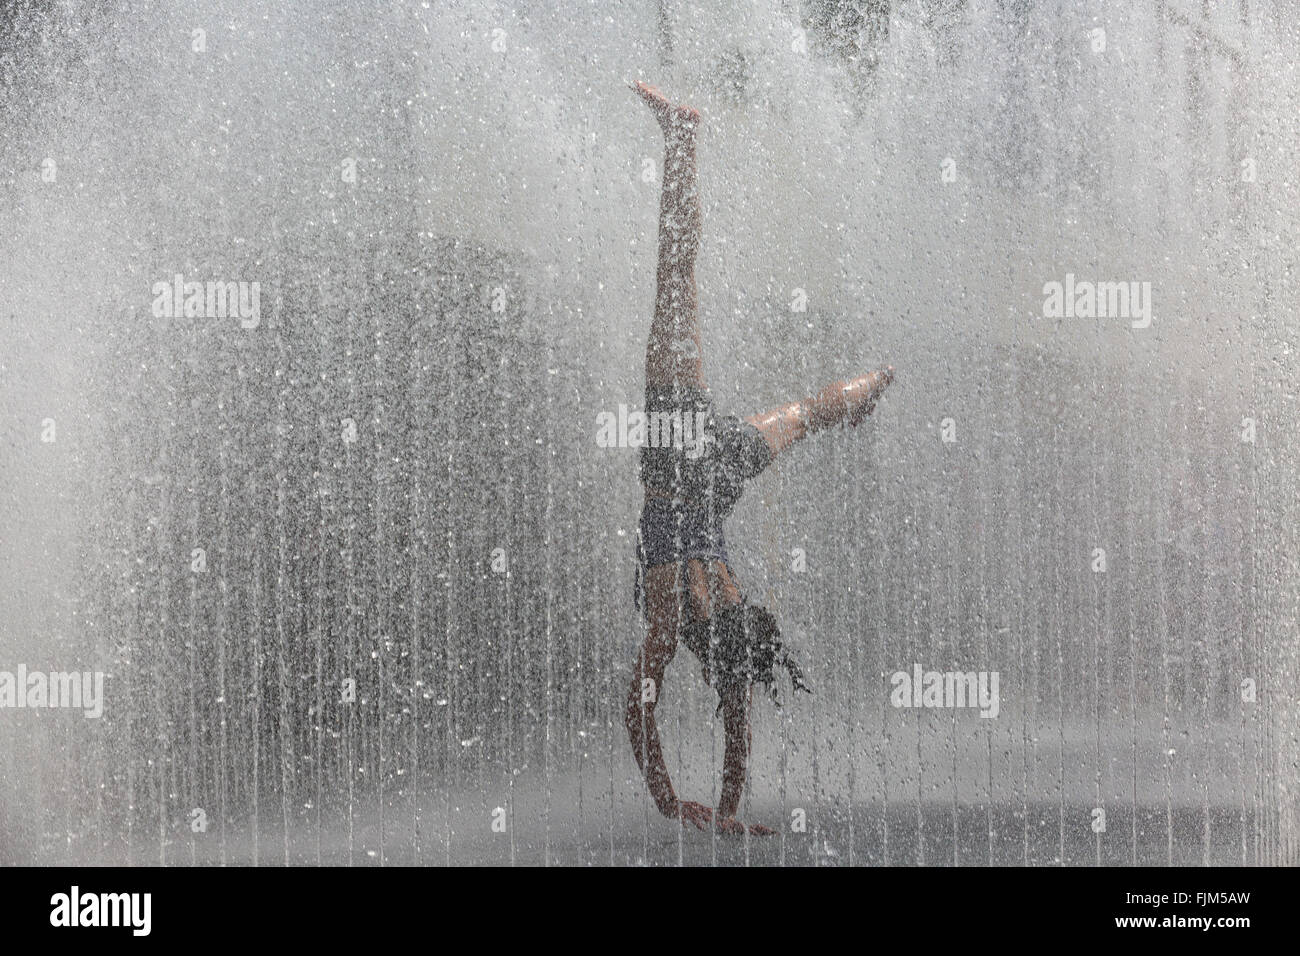 Teenage girl doing cartwheels among the curtains of water at the Appearing Rooms fountains at the Royal Festival Hall, Southbank, London, UK Stock Photo